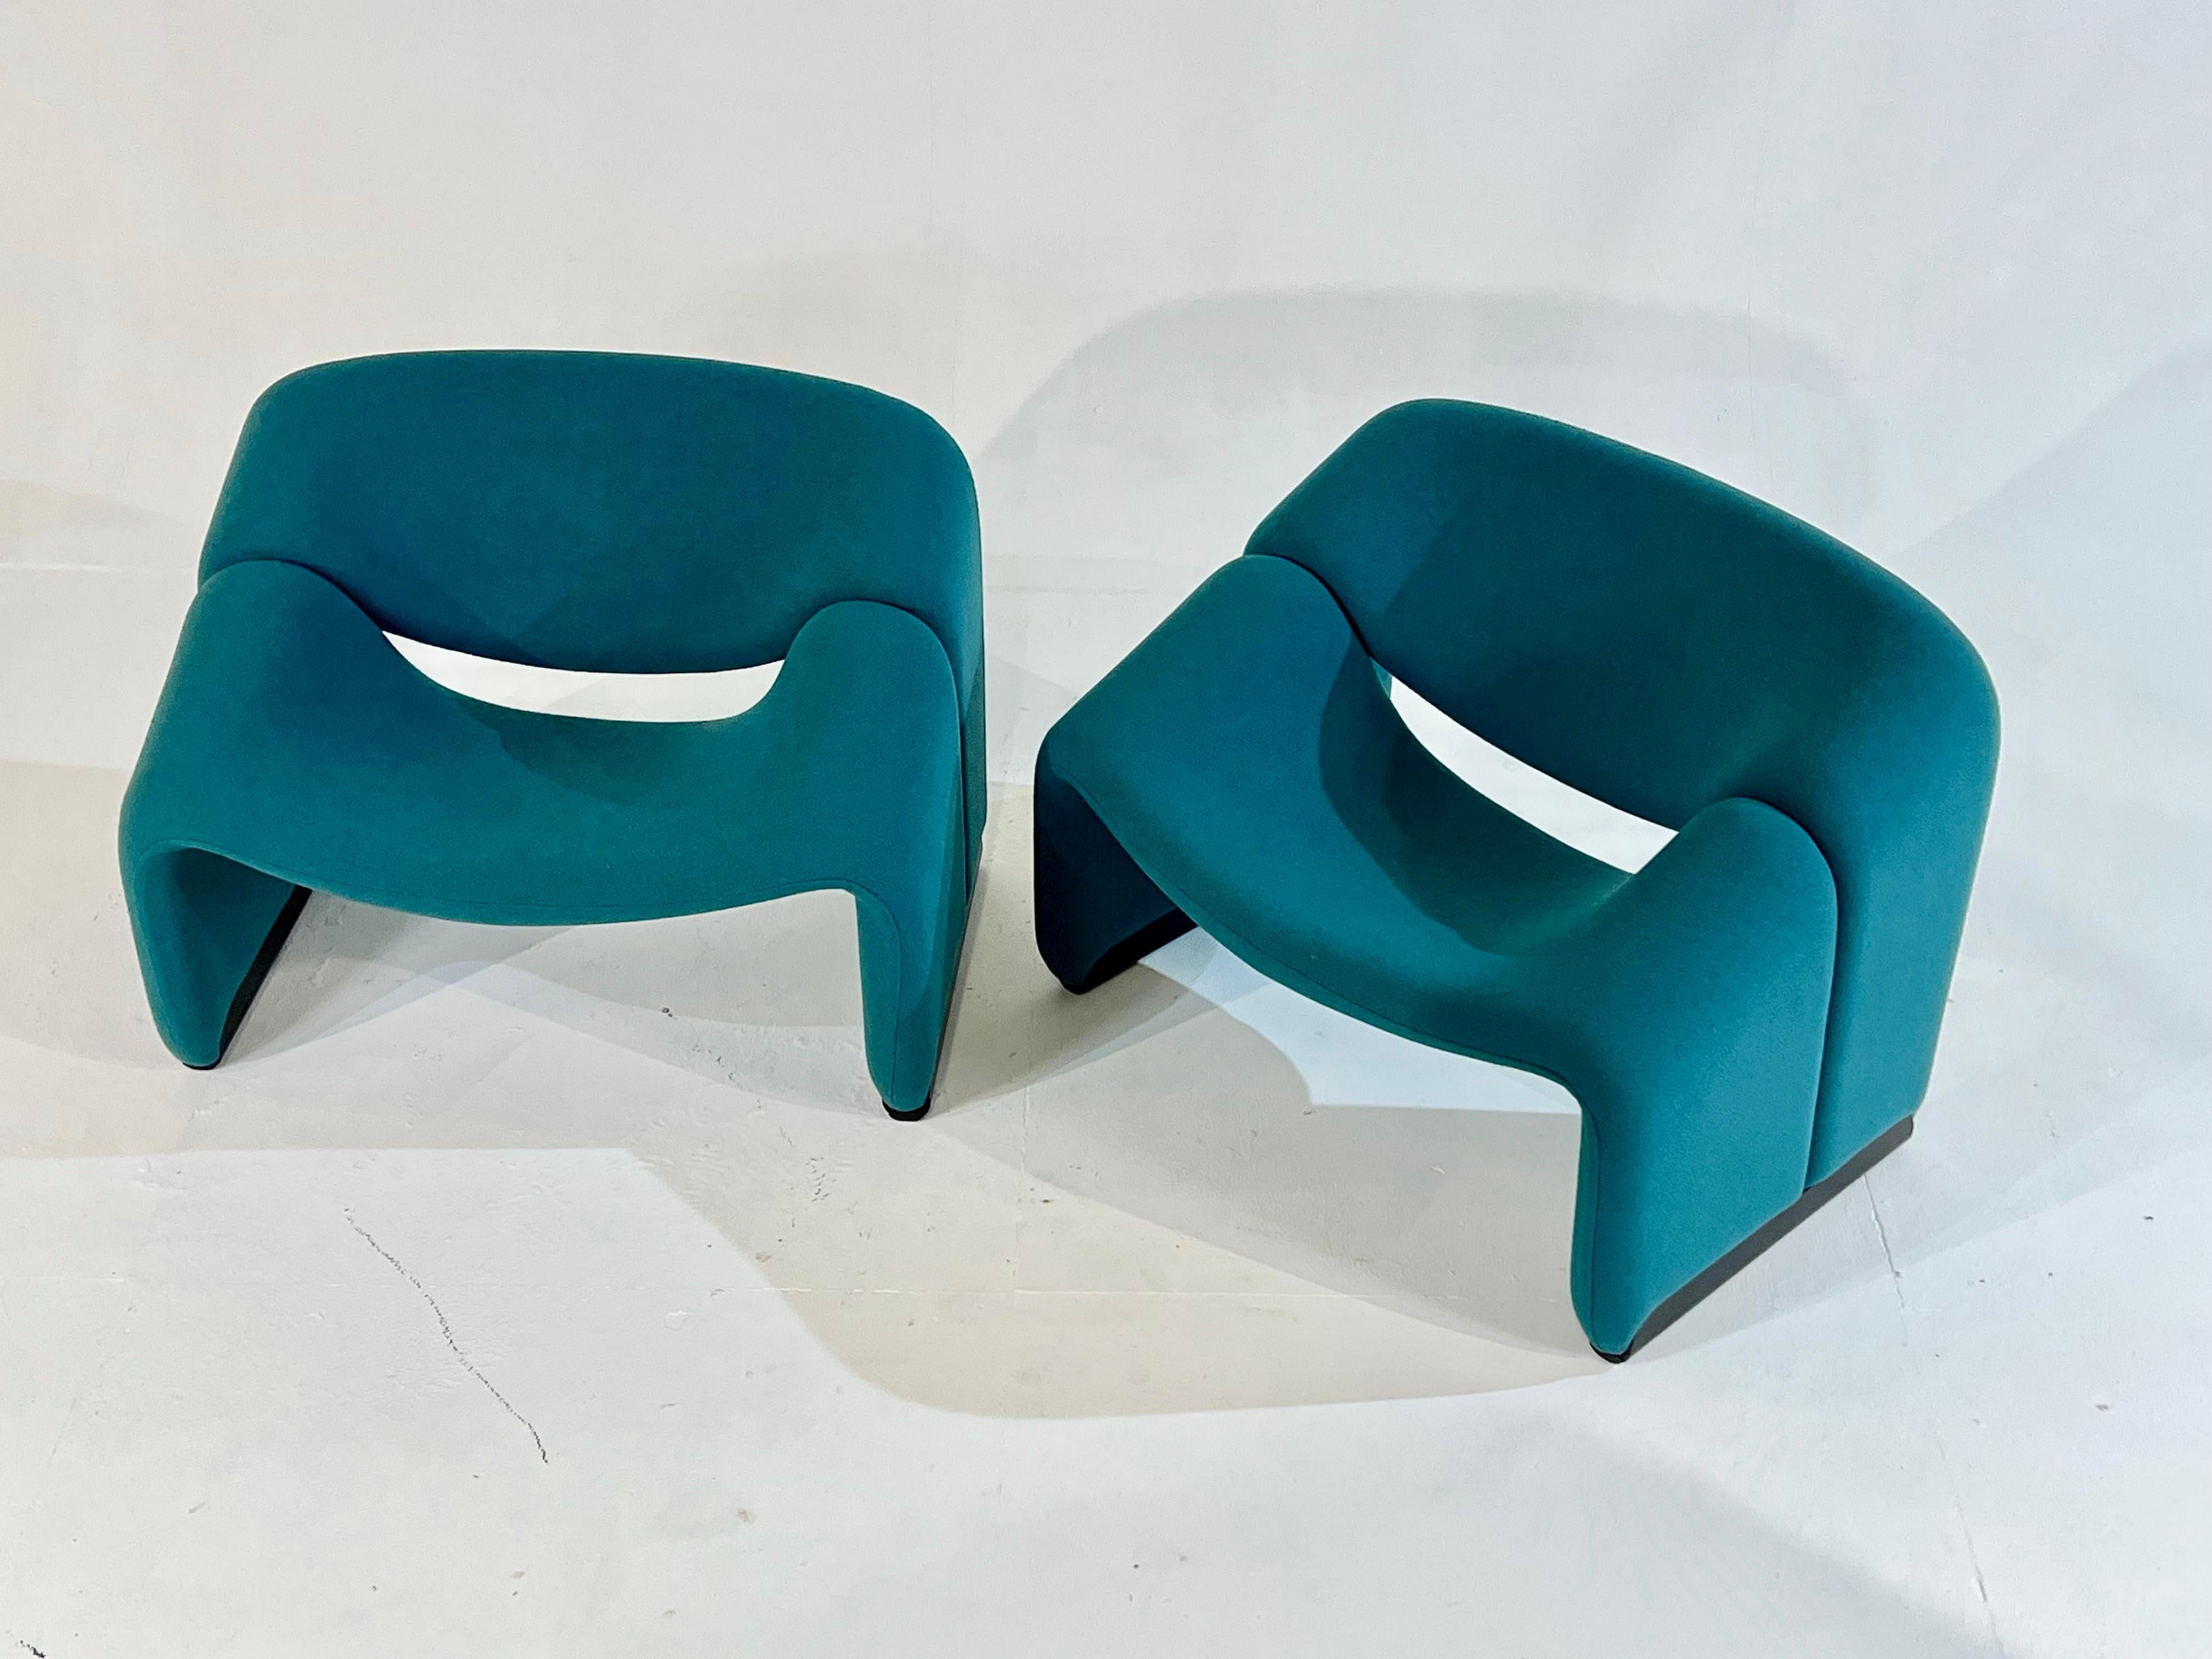 Iconic pair of chairs 'Groovy' by French designer Pierre Paulin for the Dutch Artifort, 1980. Imposing chairs not only by their size but mostly by their sculptural lines: a true modernist statement in stunning blue fabric.
 
We bought these chairs